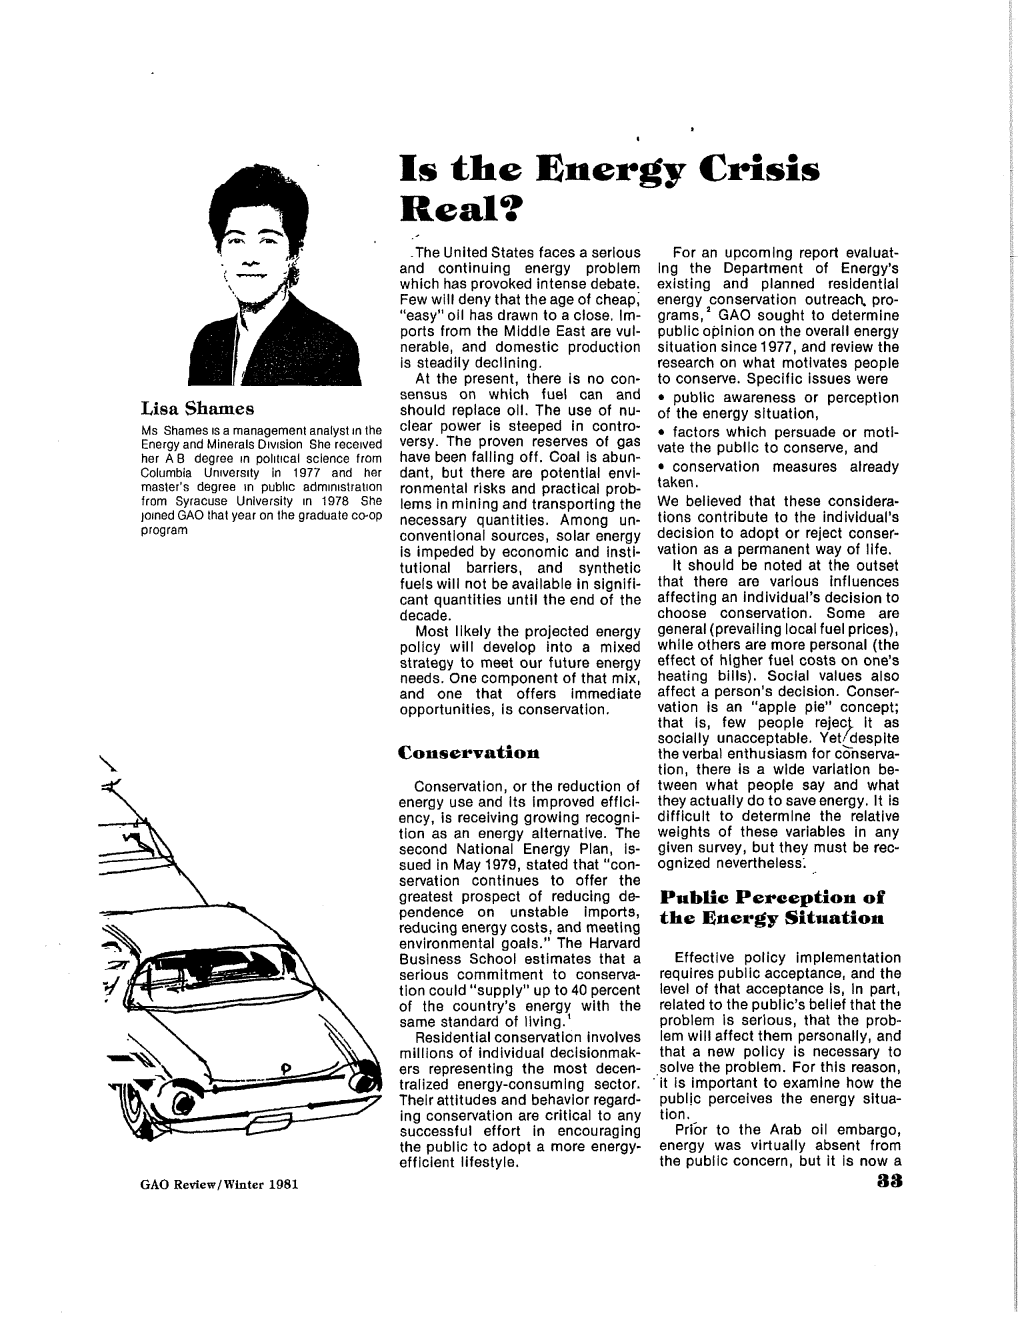 Is the Energy Crisis Real?